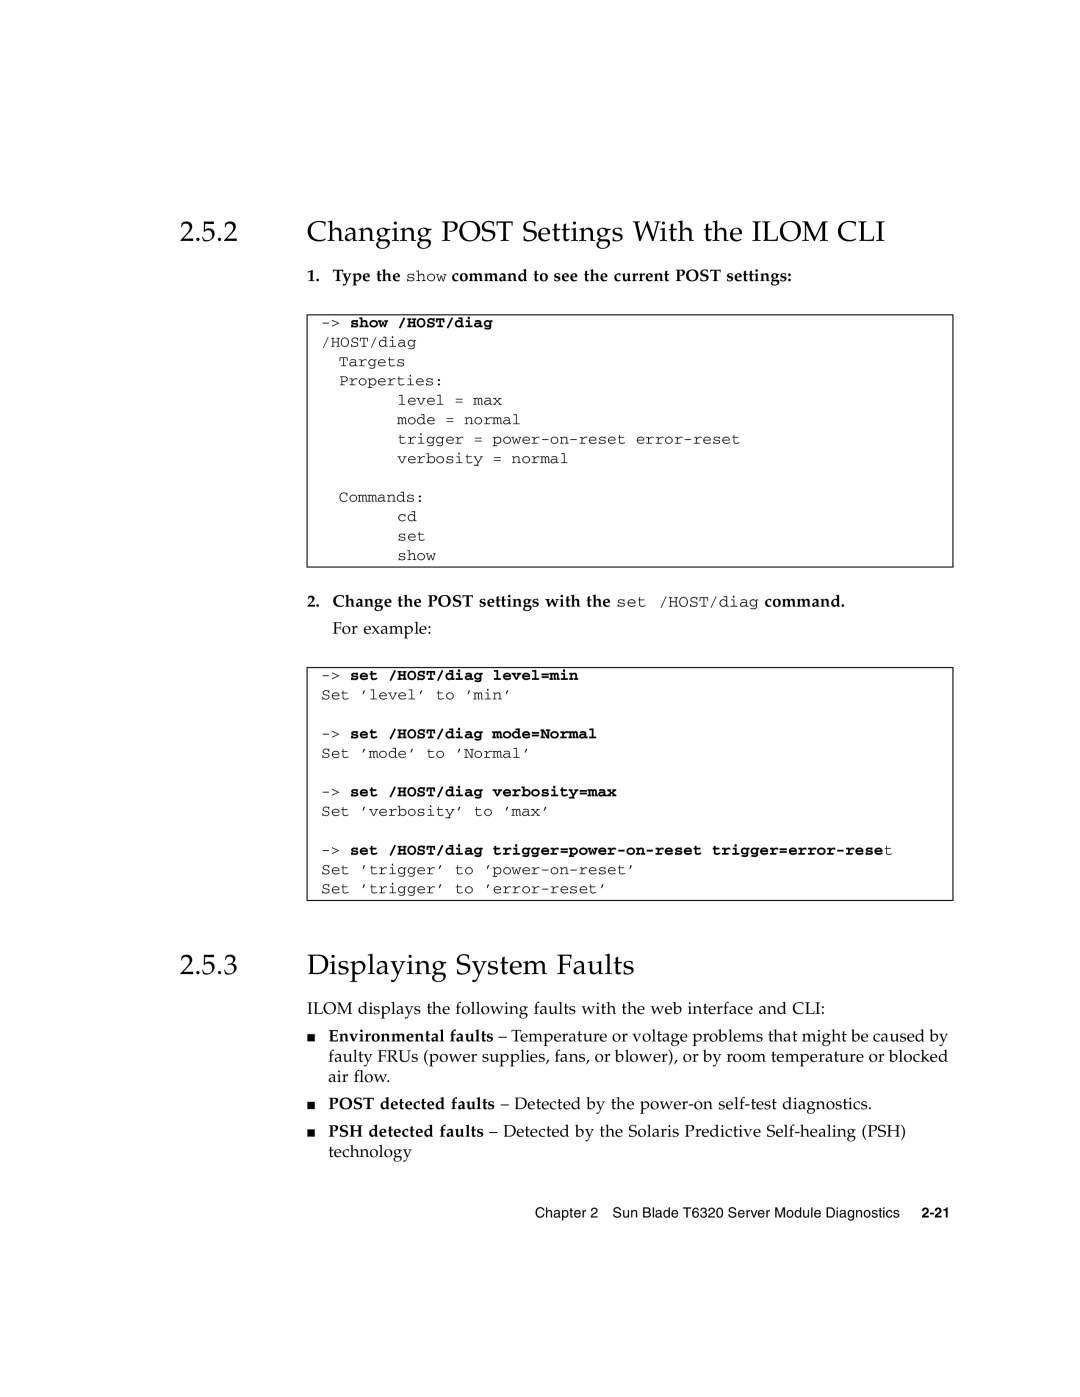 Sun Microsystems T6320 service manual Changing POST Settings With the ILOM CLI, Displaying System Faults 